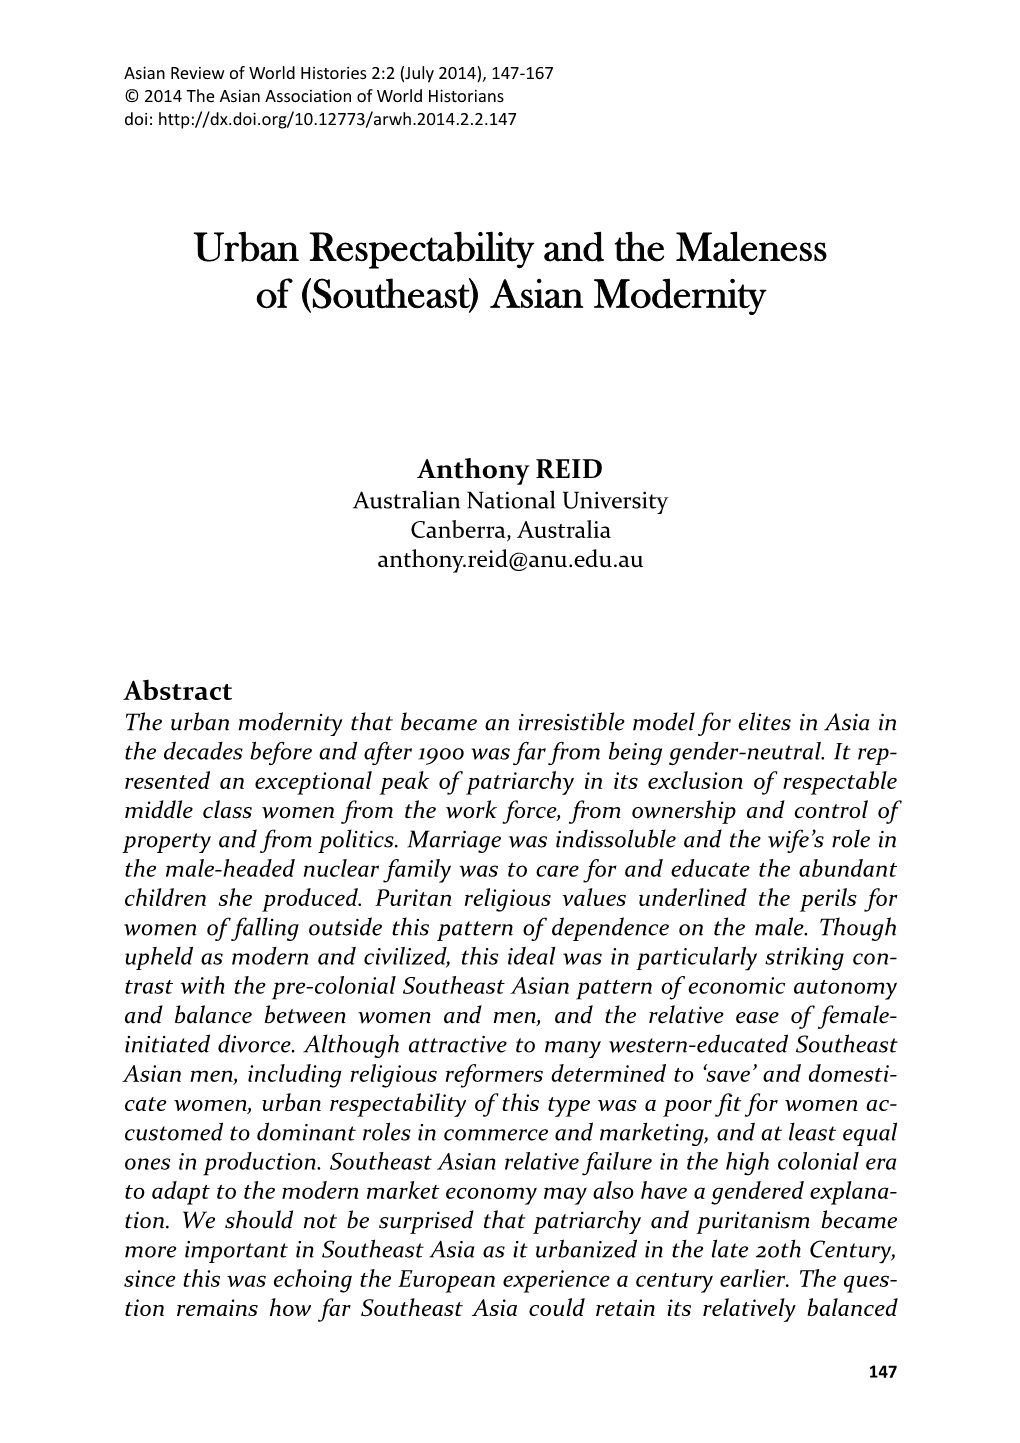 Urban Respectability and the Maleness of (Southeast) Asian Modernity